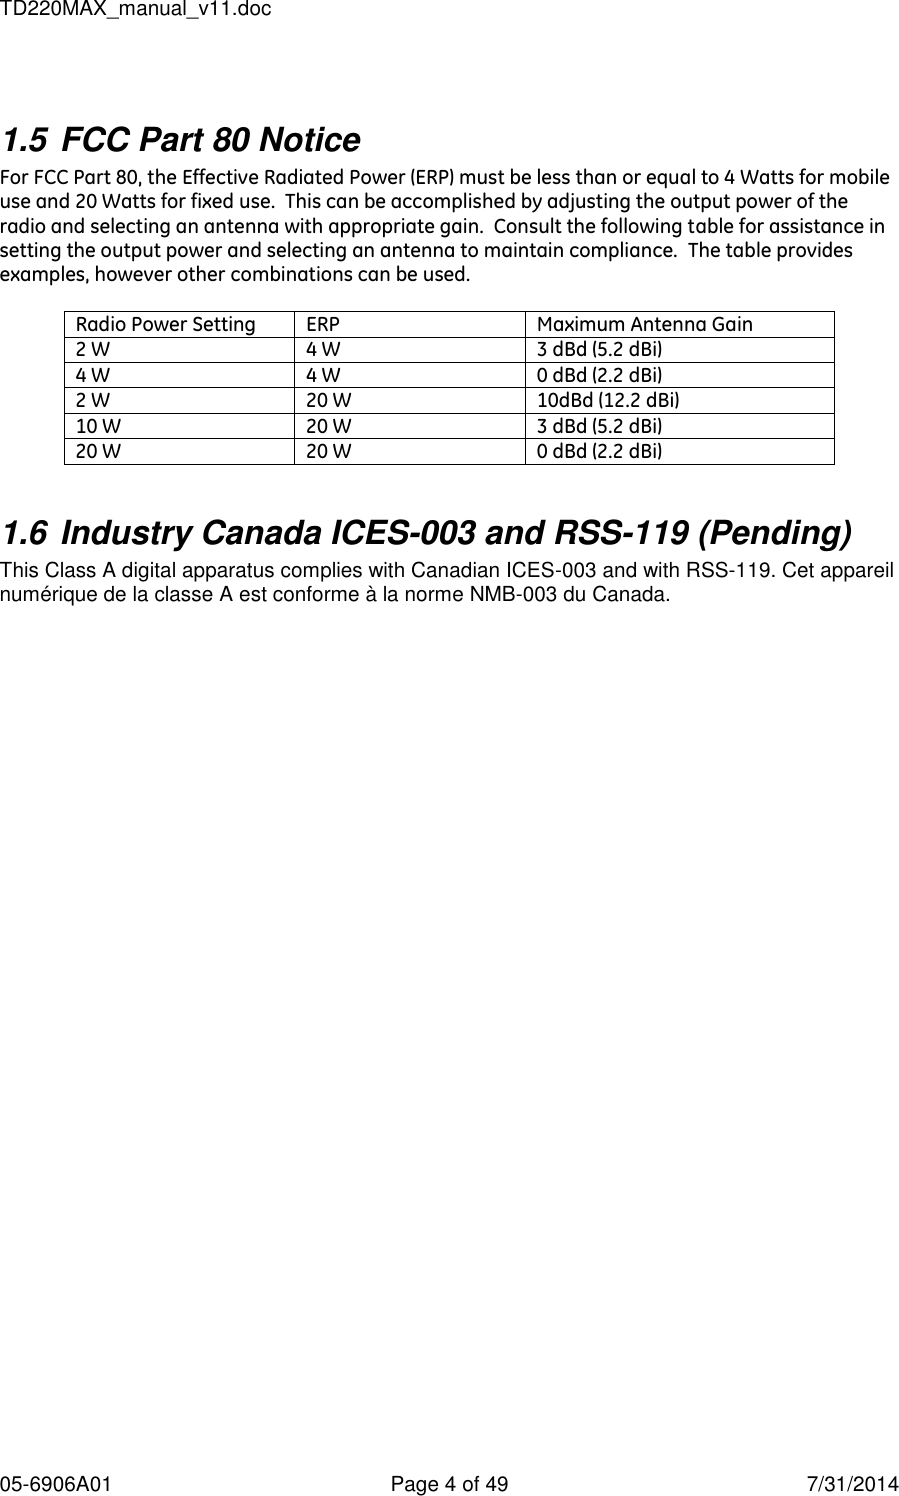 TD220MAX_manual_v11.doc 05-6906A01  Page 4 of 49  7/31/2014  1.5 FCC Part 80 Notice For FCC Part 80, the Effective Radiated Power (ERP) must be less than or equal to 4 Watts for mobile use and 20 Watts for fixed use.  This can be accomplished by adjusting the output power of the radio and selecting an antenna with appropriate gain.  Consult the following table for assistance in setting the output power and selecting an antenna to maintain compliance.  The table provides examples, however other combinations can be used.  Radio Power Setting ERP Maximum Antenna Gain 2 W 4 W 3 dBd (5.2 dBi) 4 W 4 W 0 dBd (2.2 dBi) 2 W 20 W 10dBd (12.2 dBi) 10 W 20 W 3 dBd (5.2 dBi) 20 W 20 W 0 dBd (2.2 dBi)  1.6 Industry Canada ICES-003 and RSS-119 (Pending) This Class A digital apparatus complies with Canadian ICES-003 and with RSS-119. Cet appareil numérique de la classe A est conforme à la norme NMB-003 du Canada.  